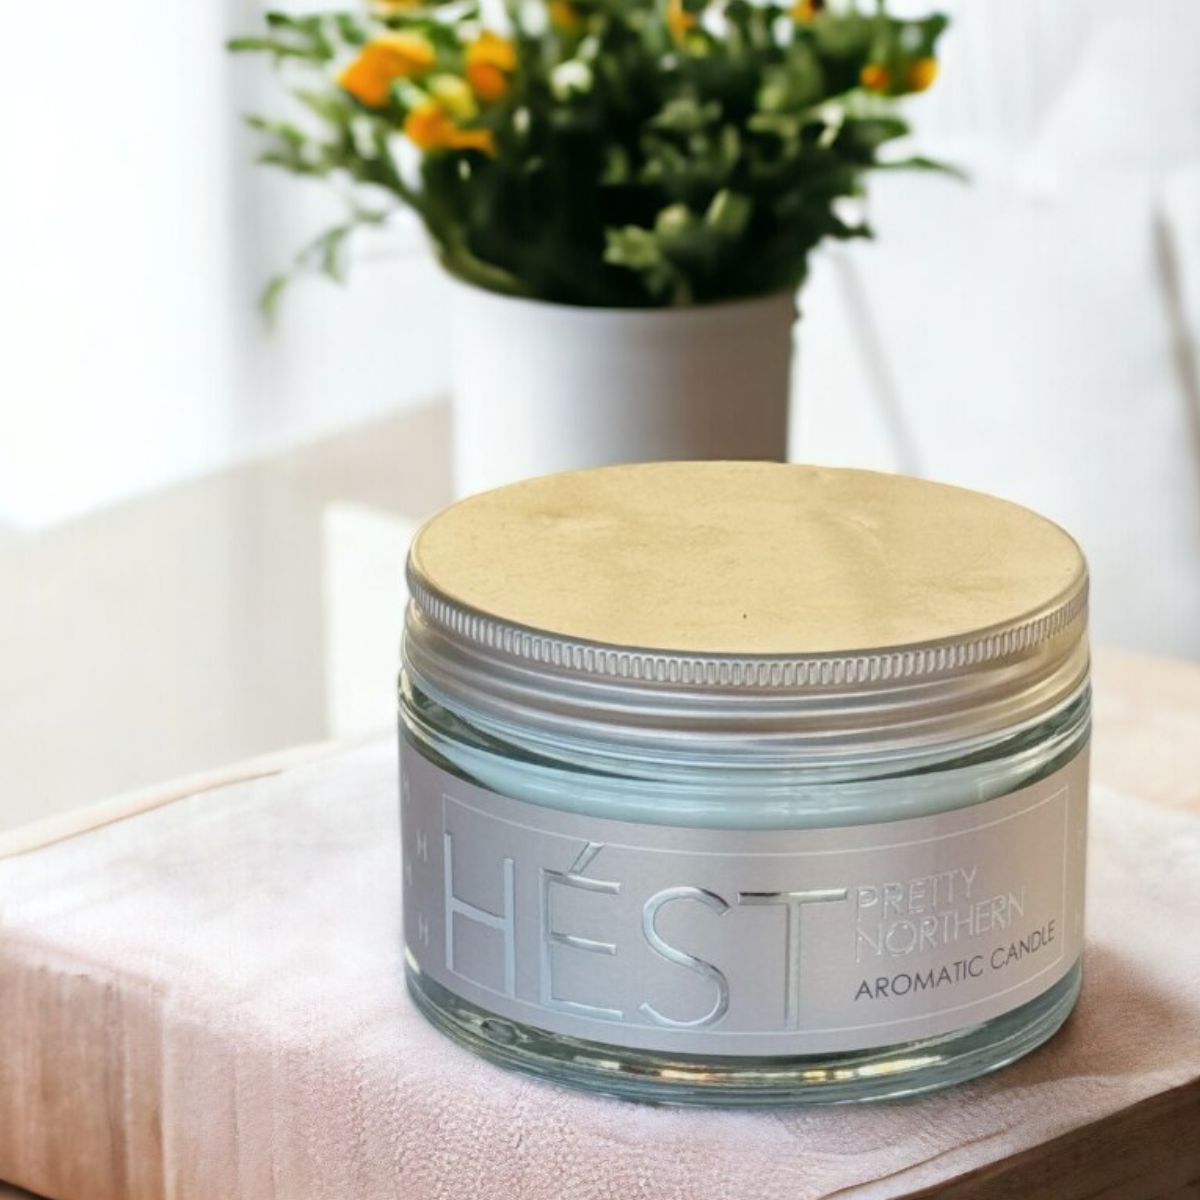 HÉST Aromatic Candle - Pretty Northern 150g